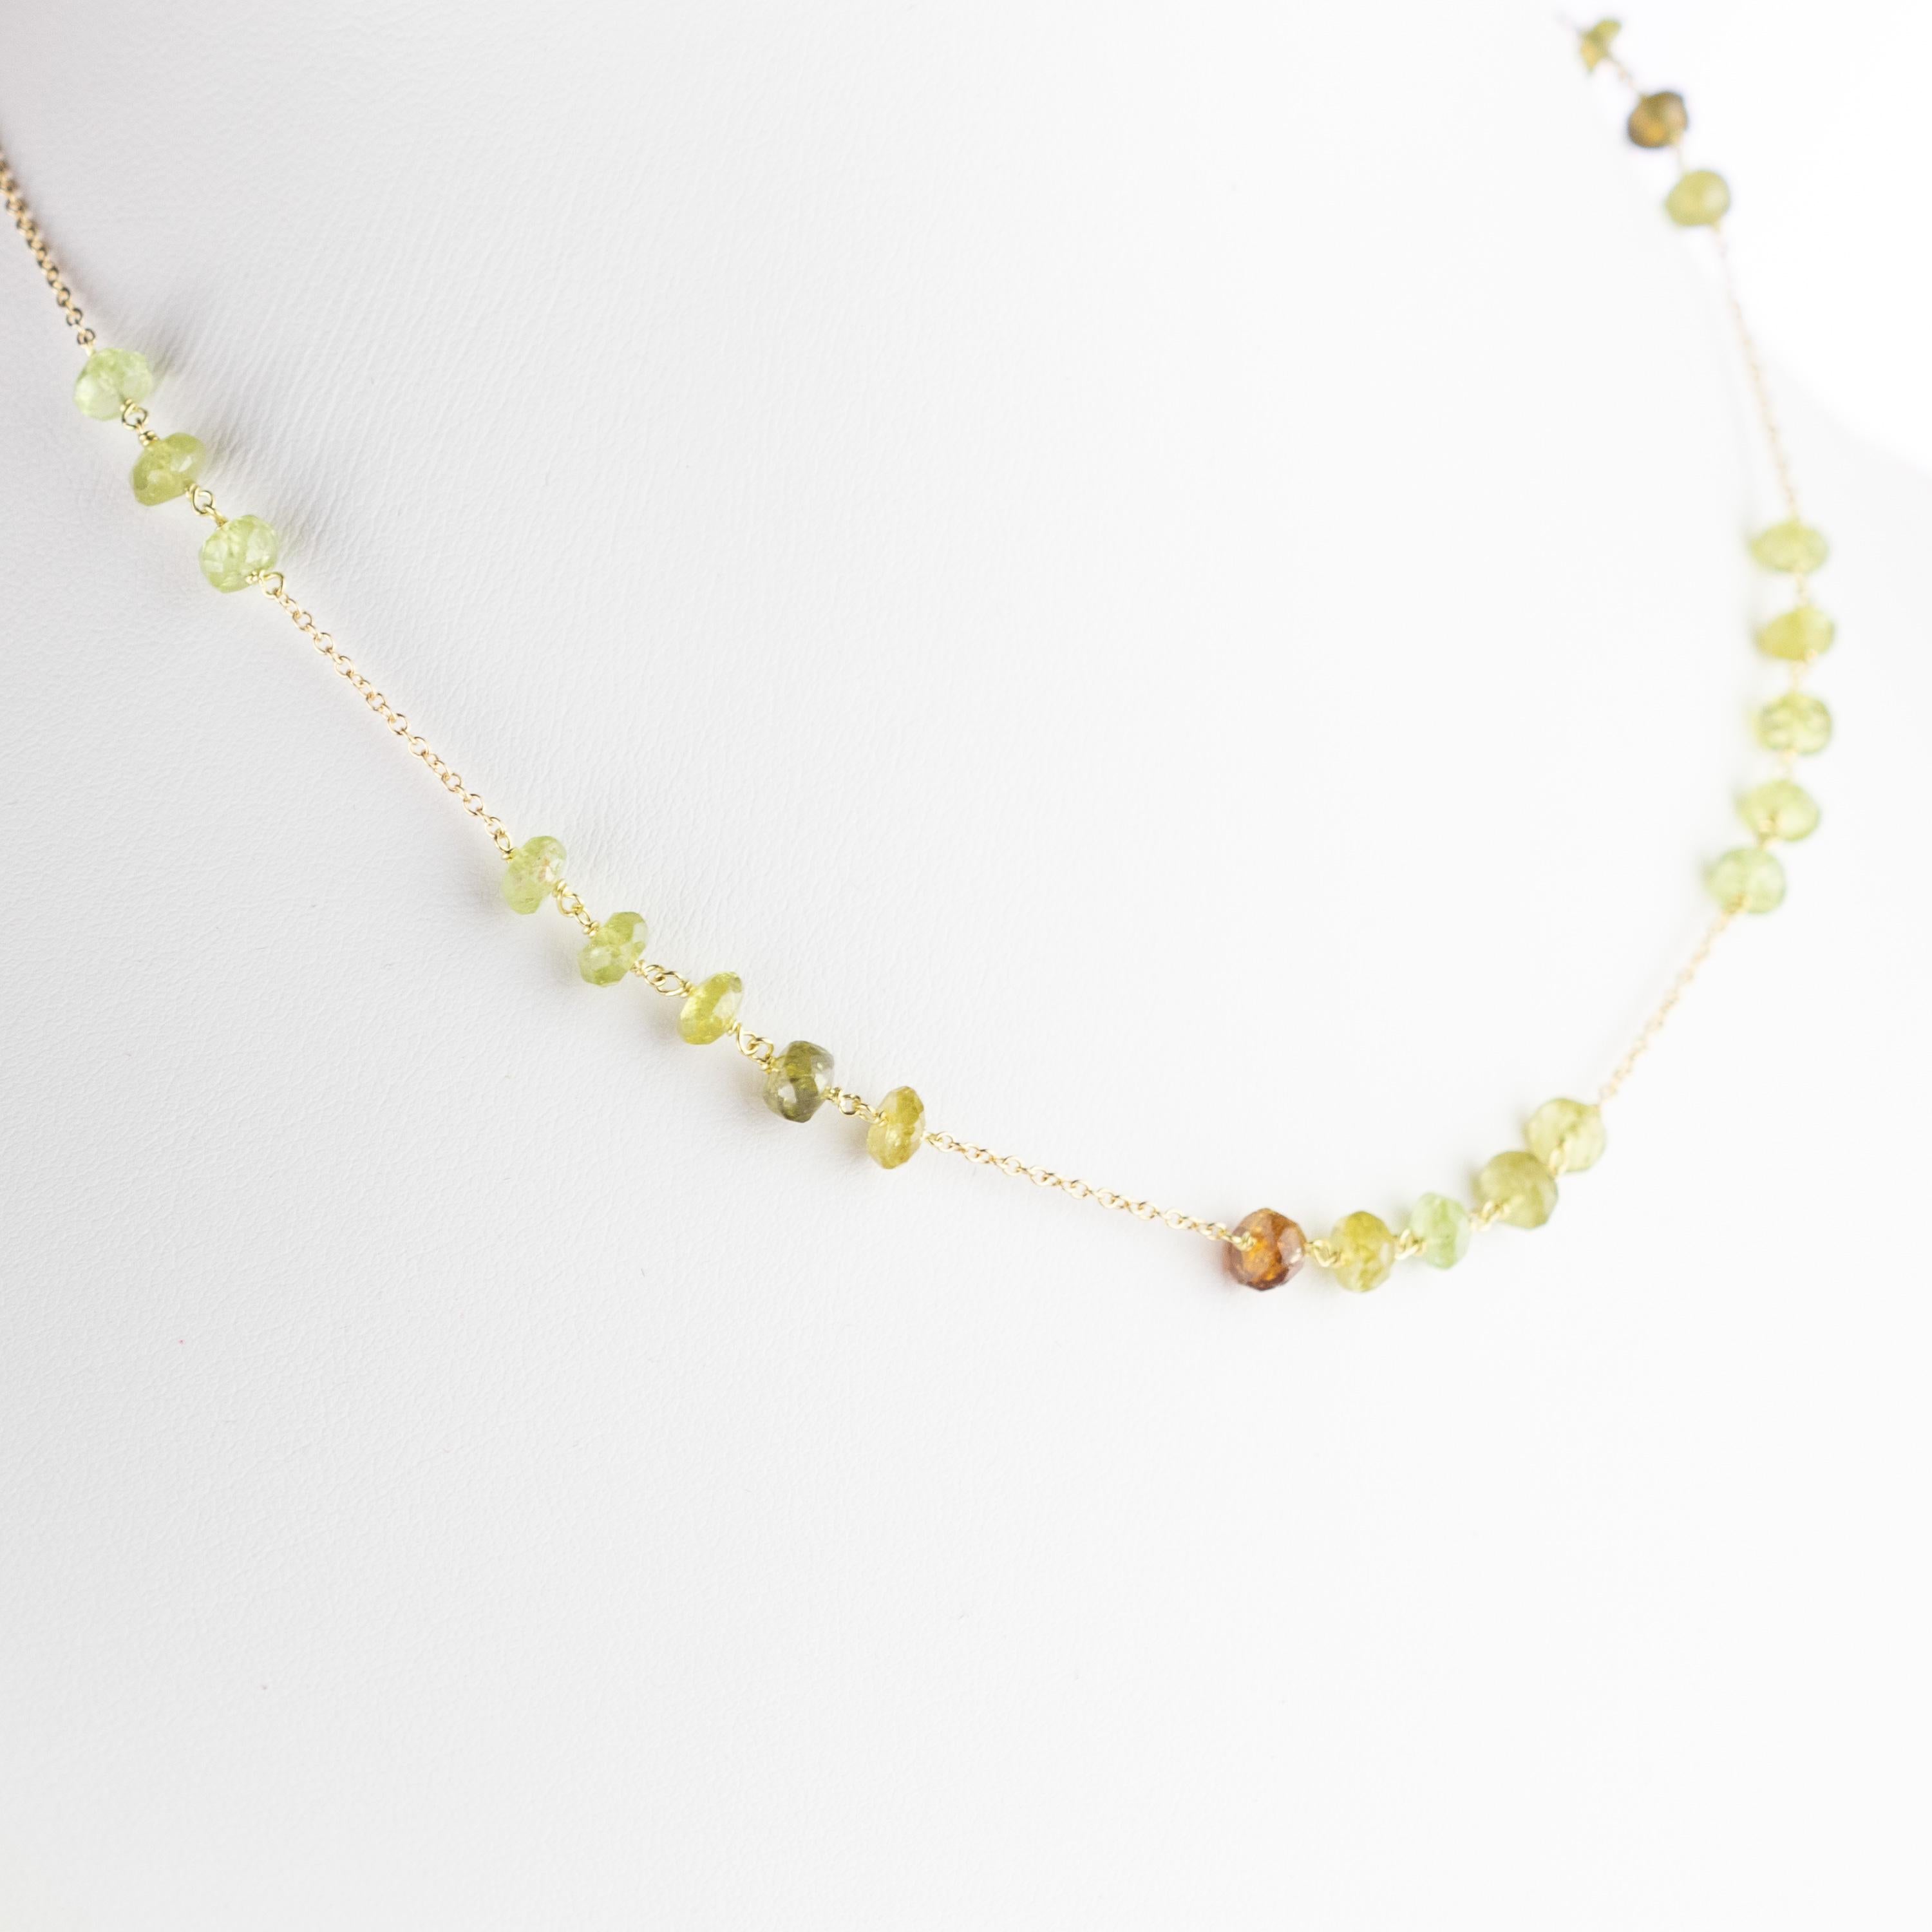 Marvellous necklace starring natural green tourmaline rondelles gems, for a bright charm of uniqueness. Luminous jewel with natural precious jewellery on elegant 18 karat yellow gold setting.

Green represents abundance, renewal, growth and nature.